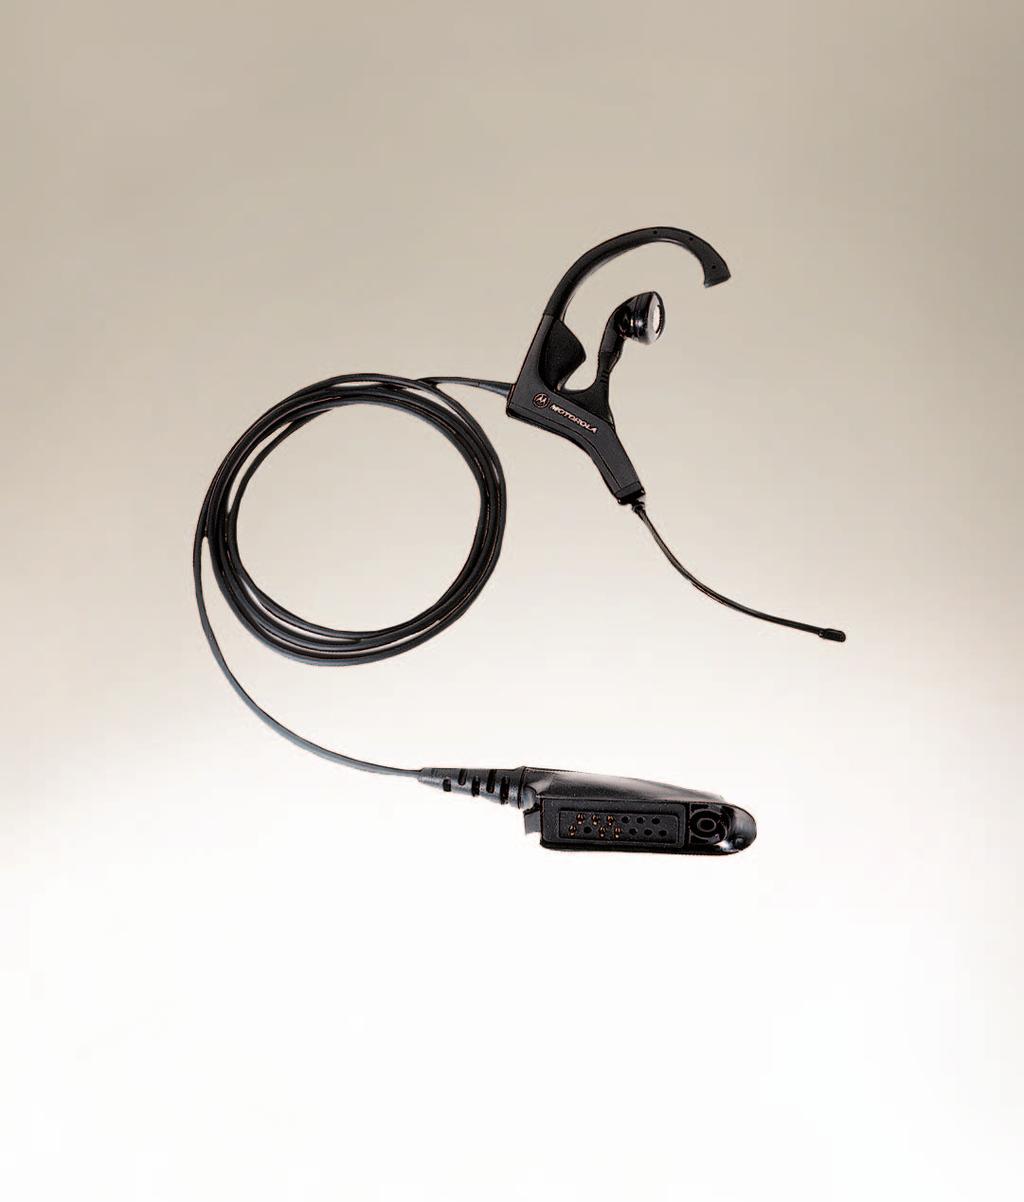 high-clarity, hands-free, discreet two-way communication, while maintaining the comfort necessary for extended-wear in moderate noise environments.